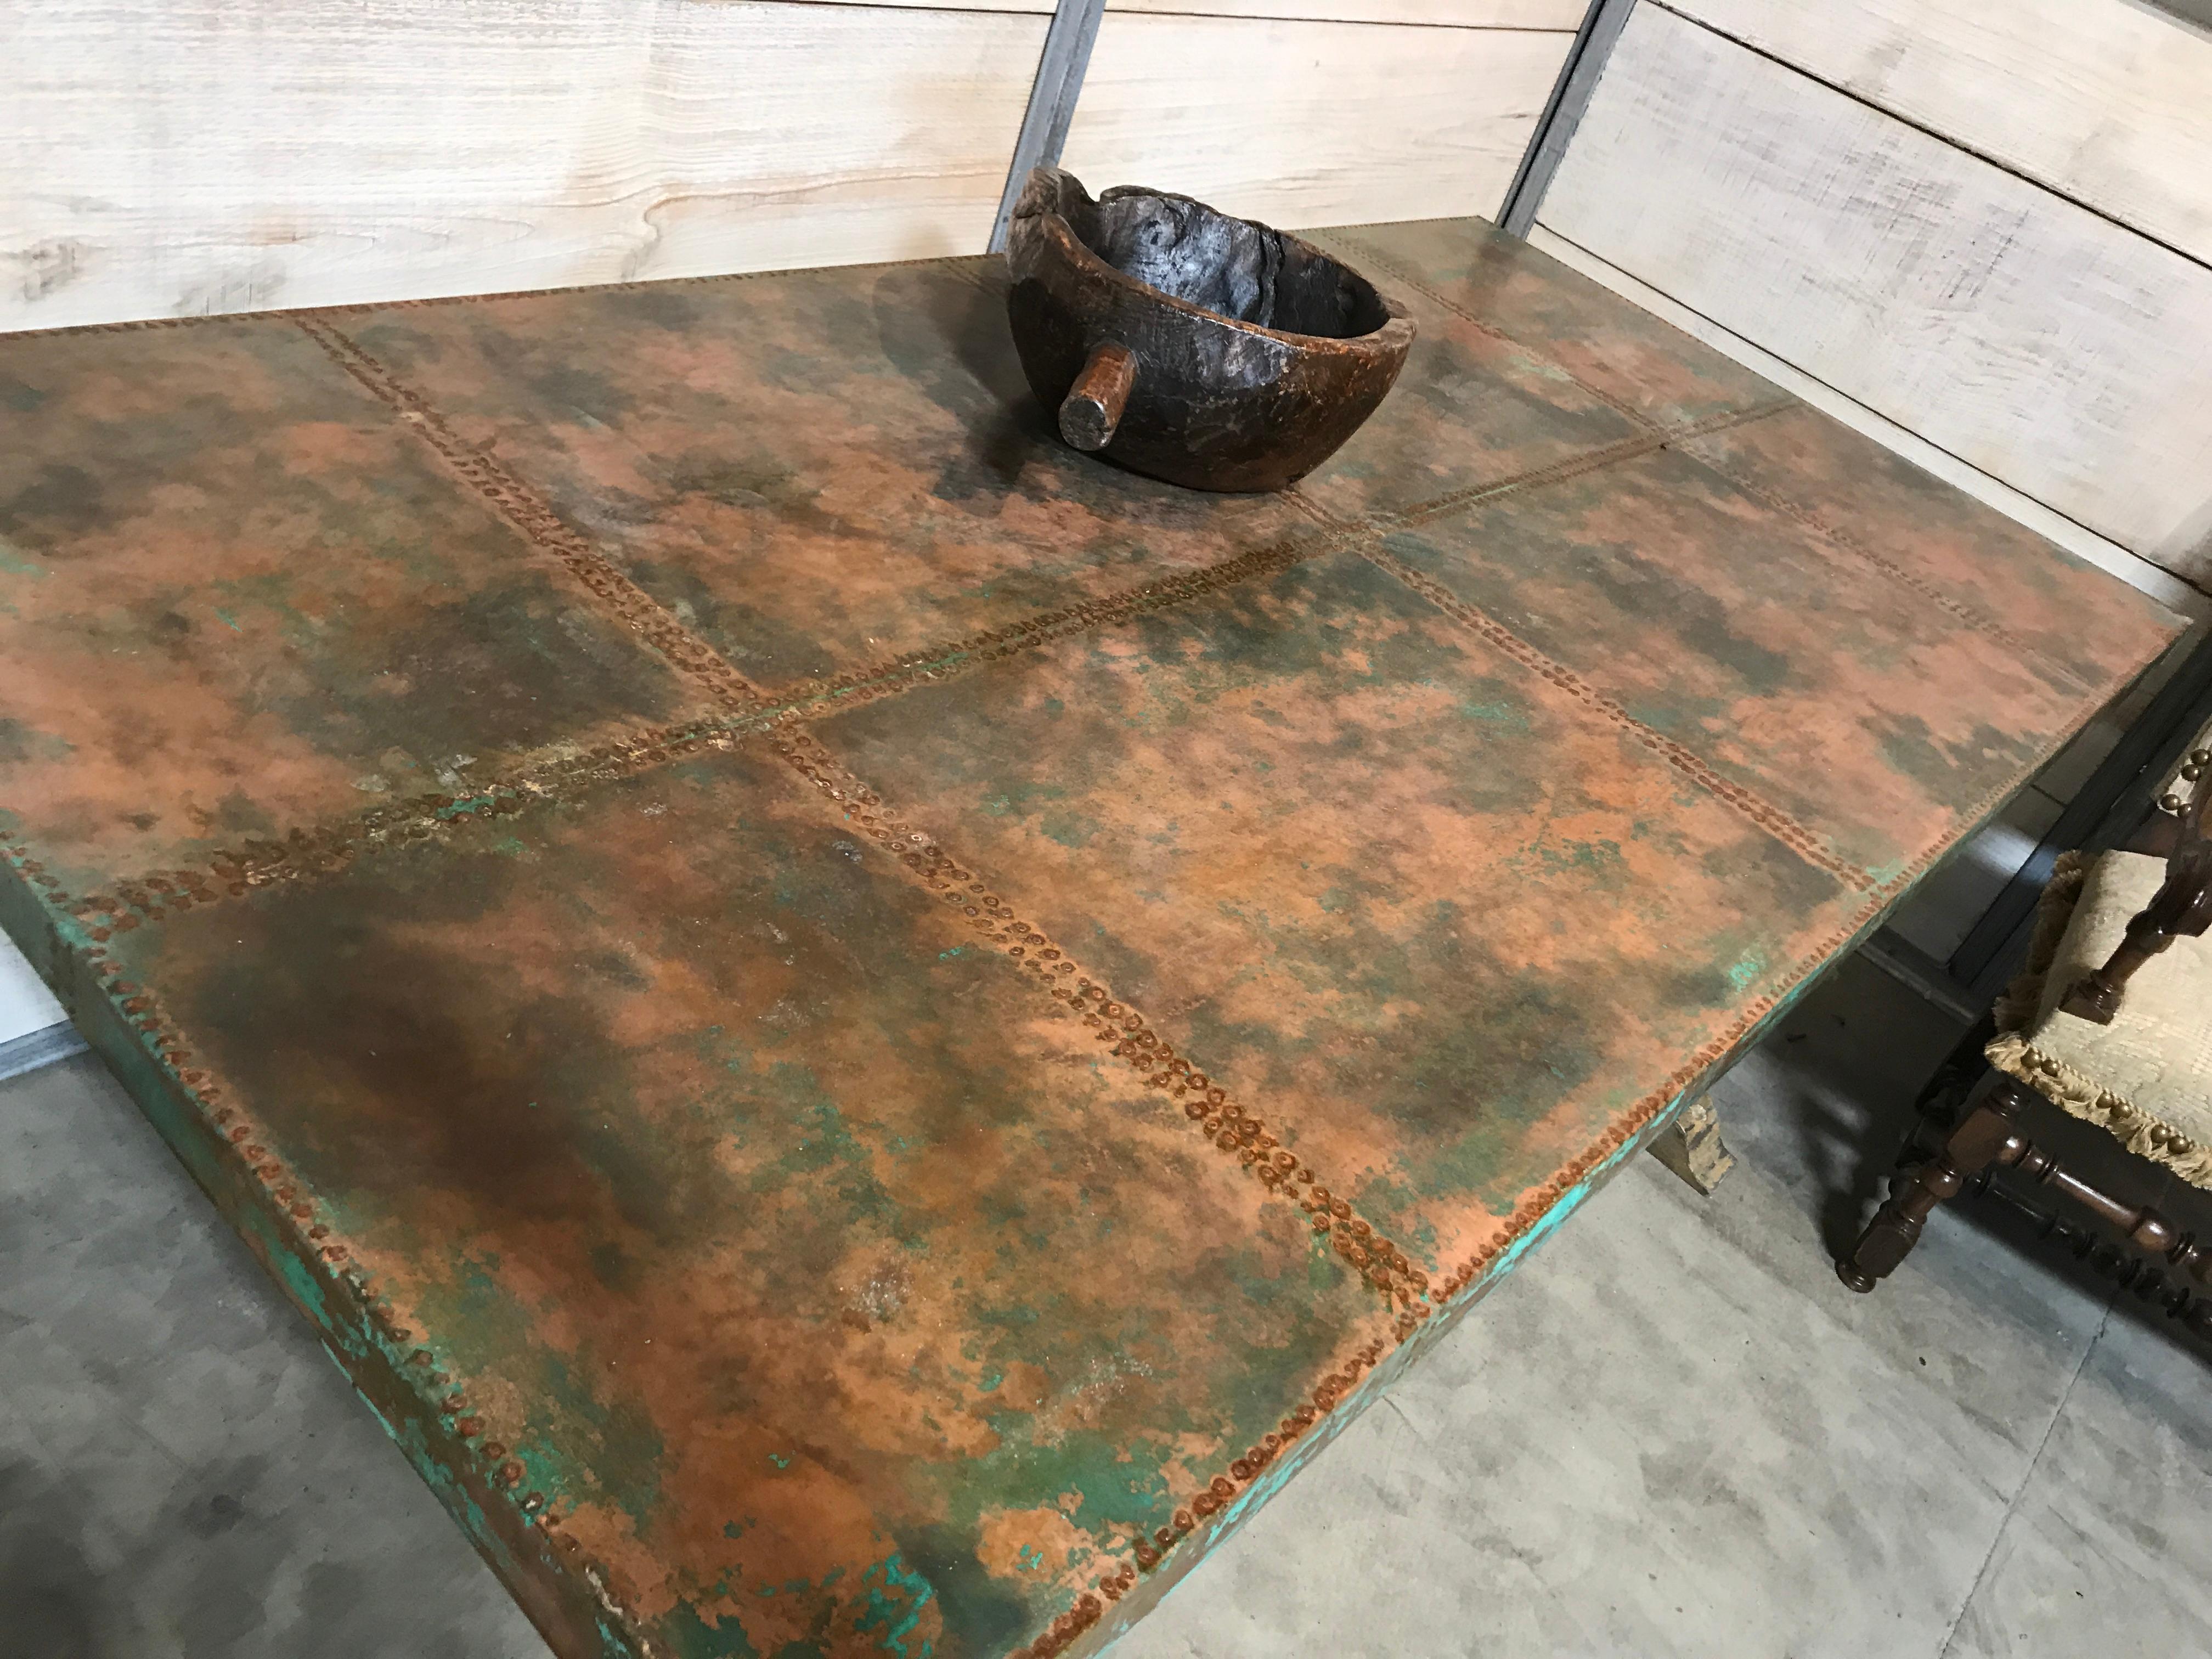 Top paneled in copper with a green “verdigris“ patination and 2000 hand-hammered nails. Trestle Base made of cedar with four chamfered uprights and central stretcher. All with distressed painted finish. This table designed and custom made by